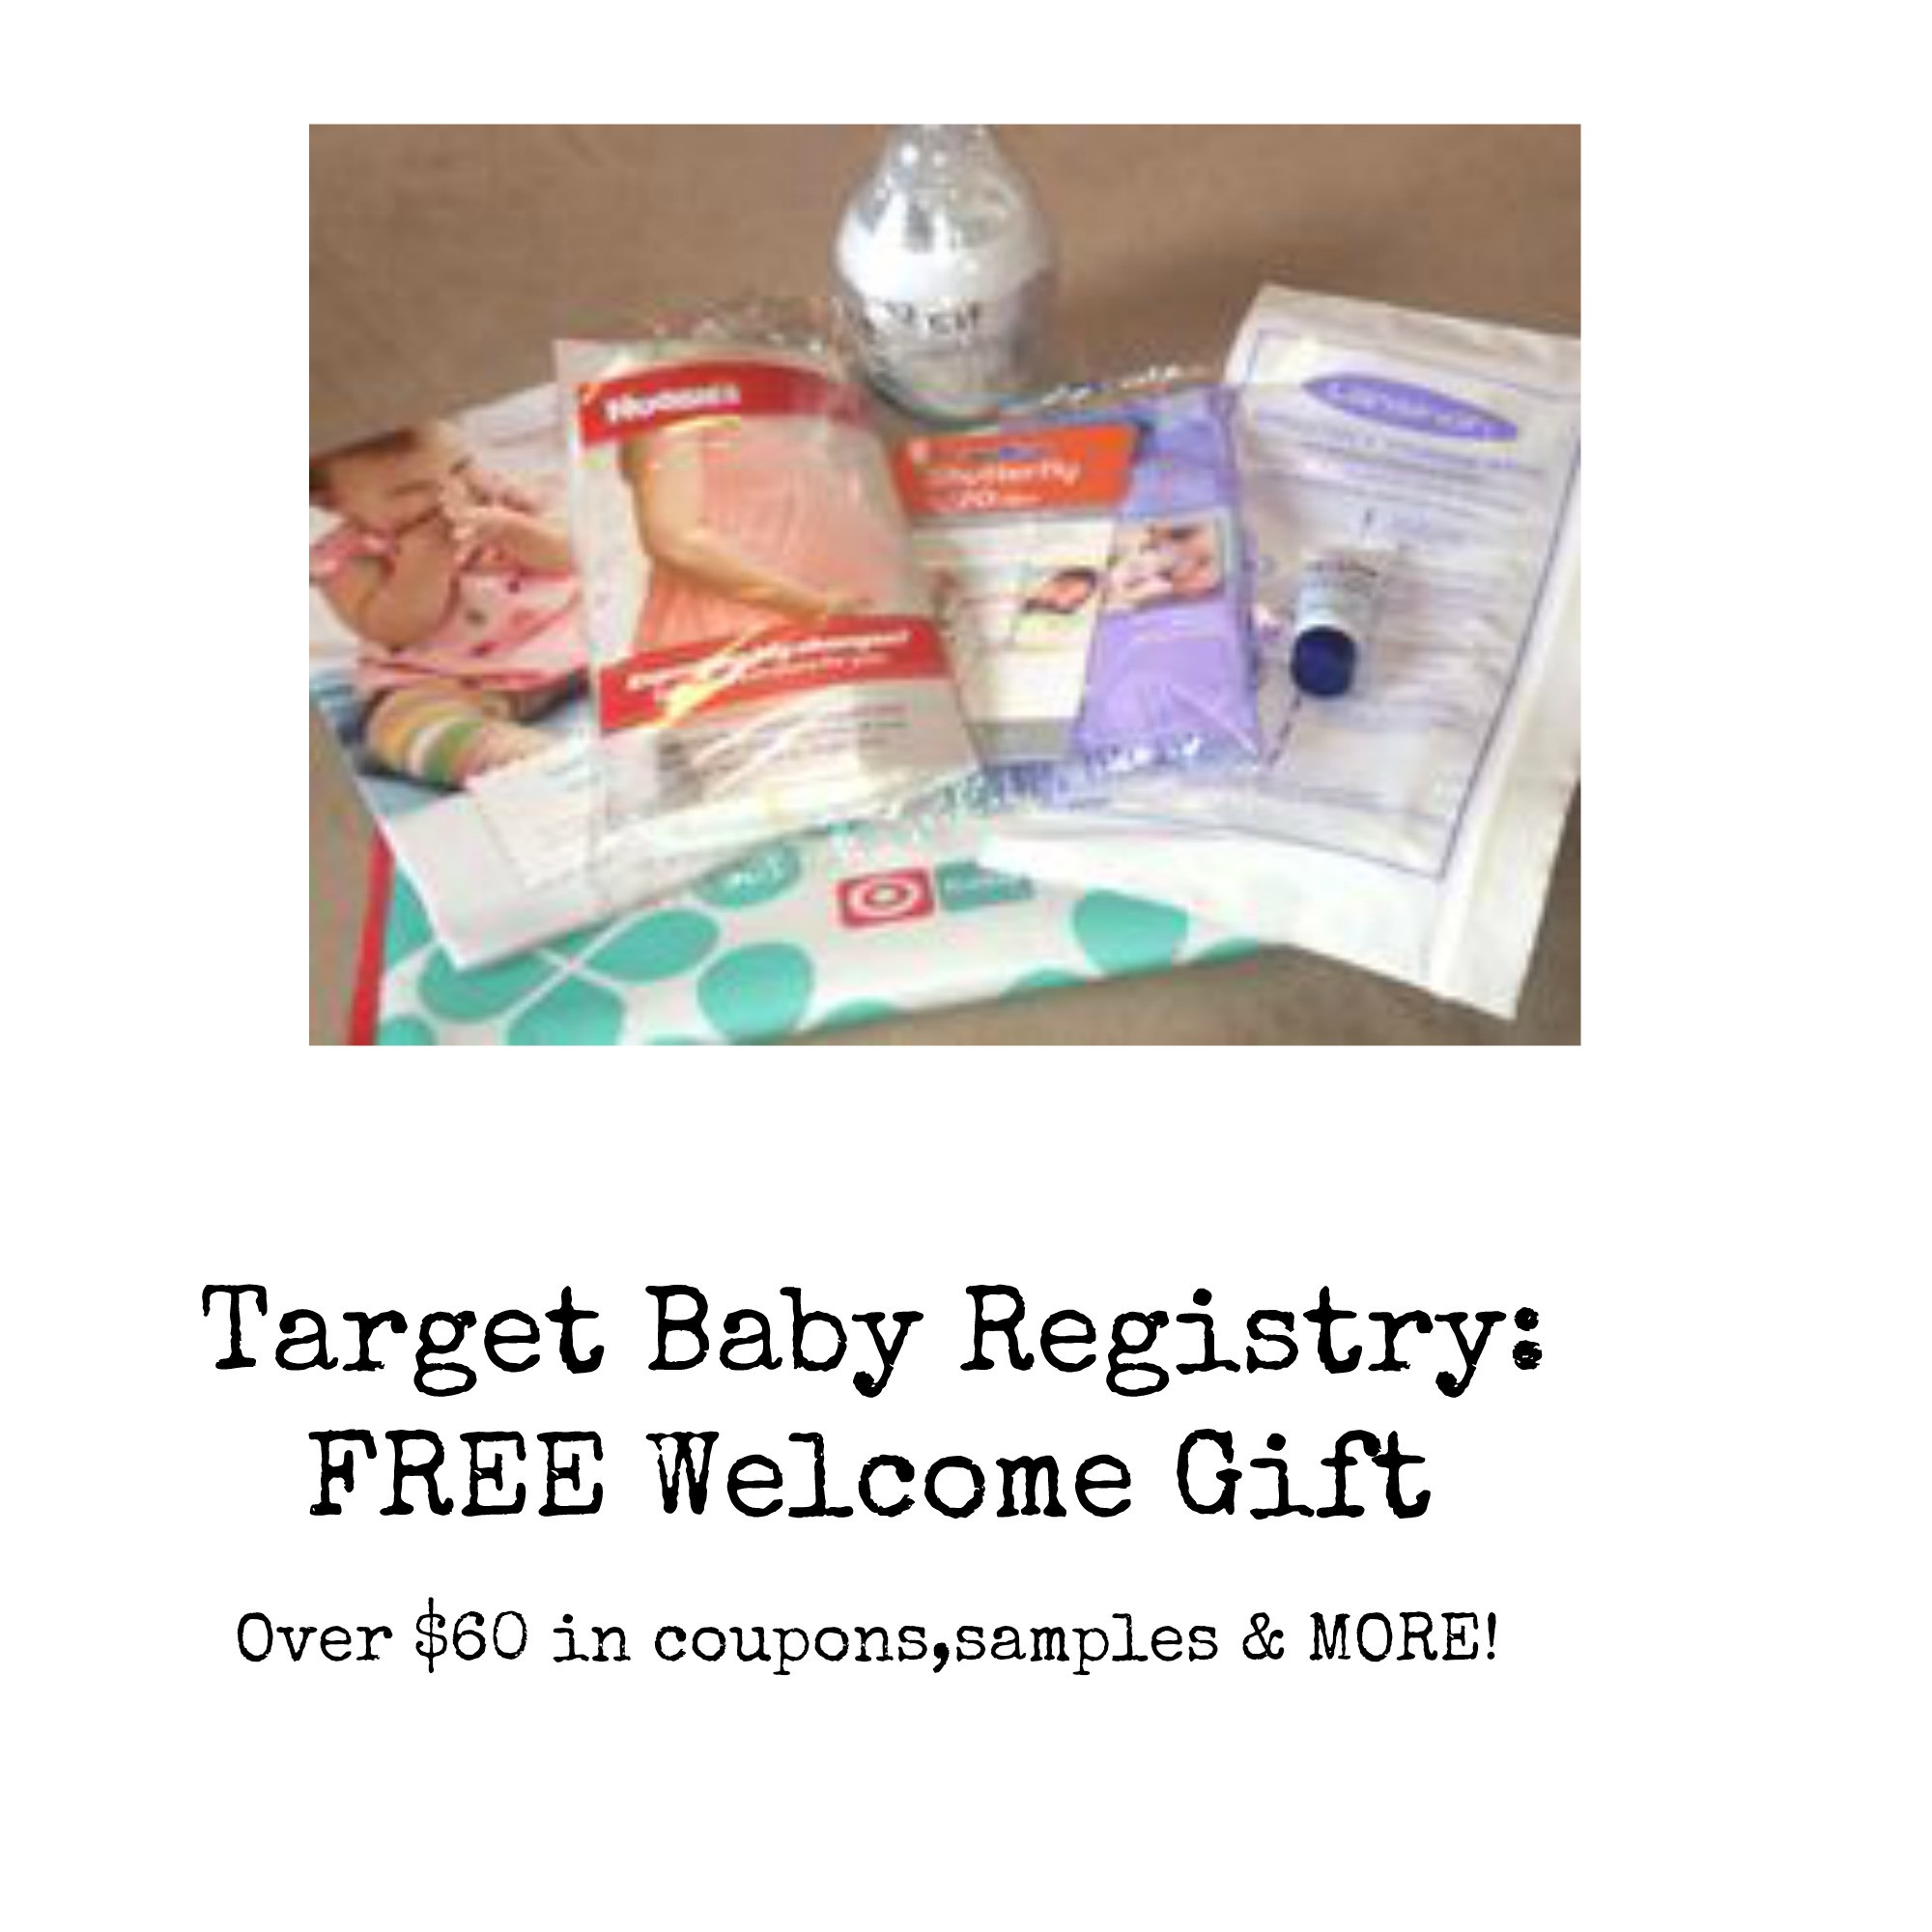 Target Baby Gifts
 Tar Baby Registry FREE Wel e Gift Over $60 Value